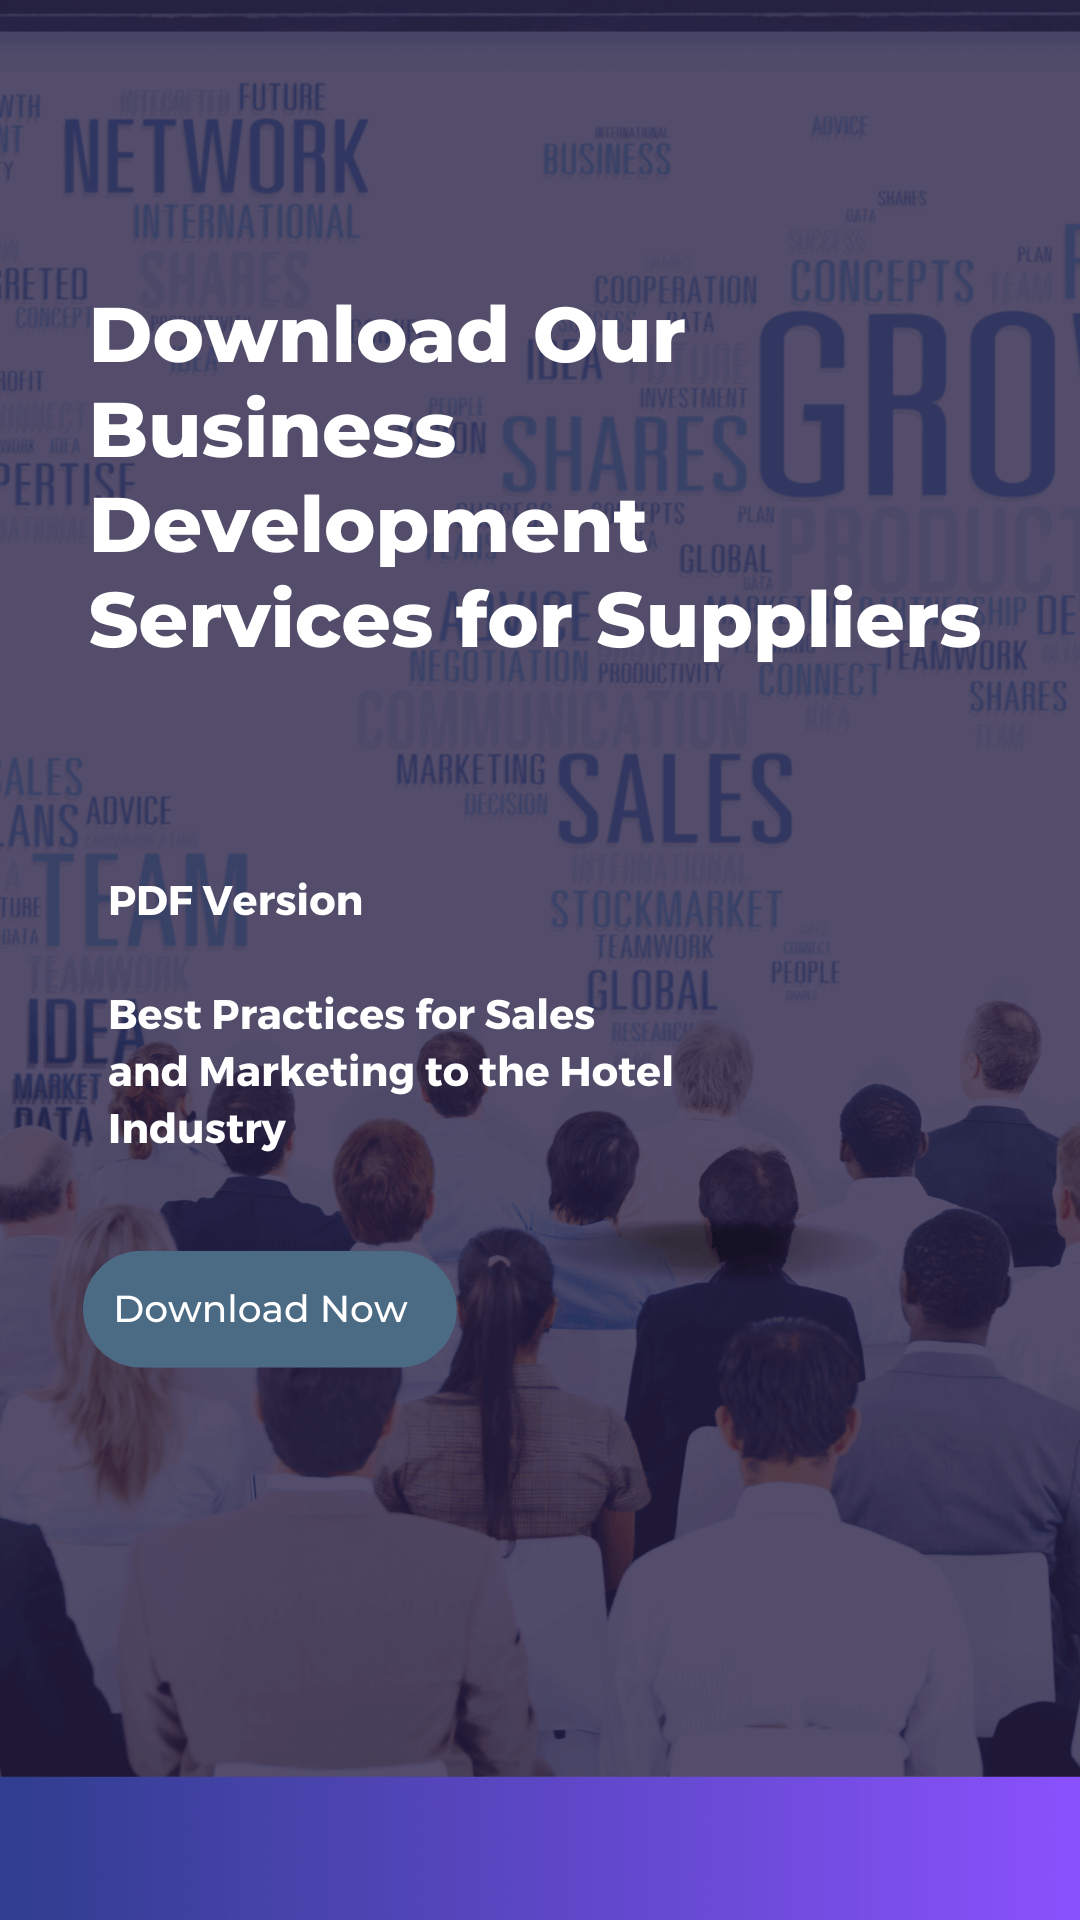 SERVICES FOR SUPPLIERS IN HOSPITALITY